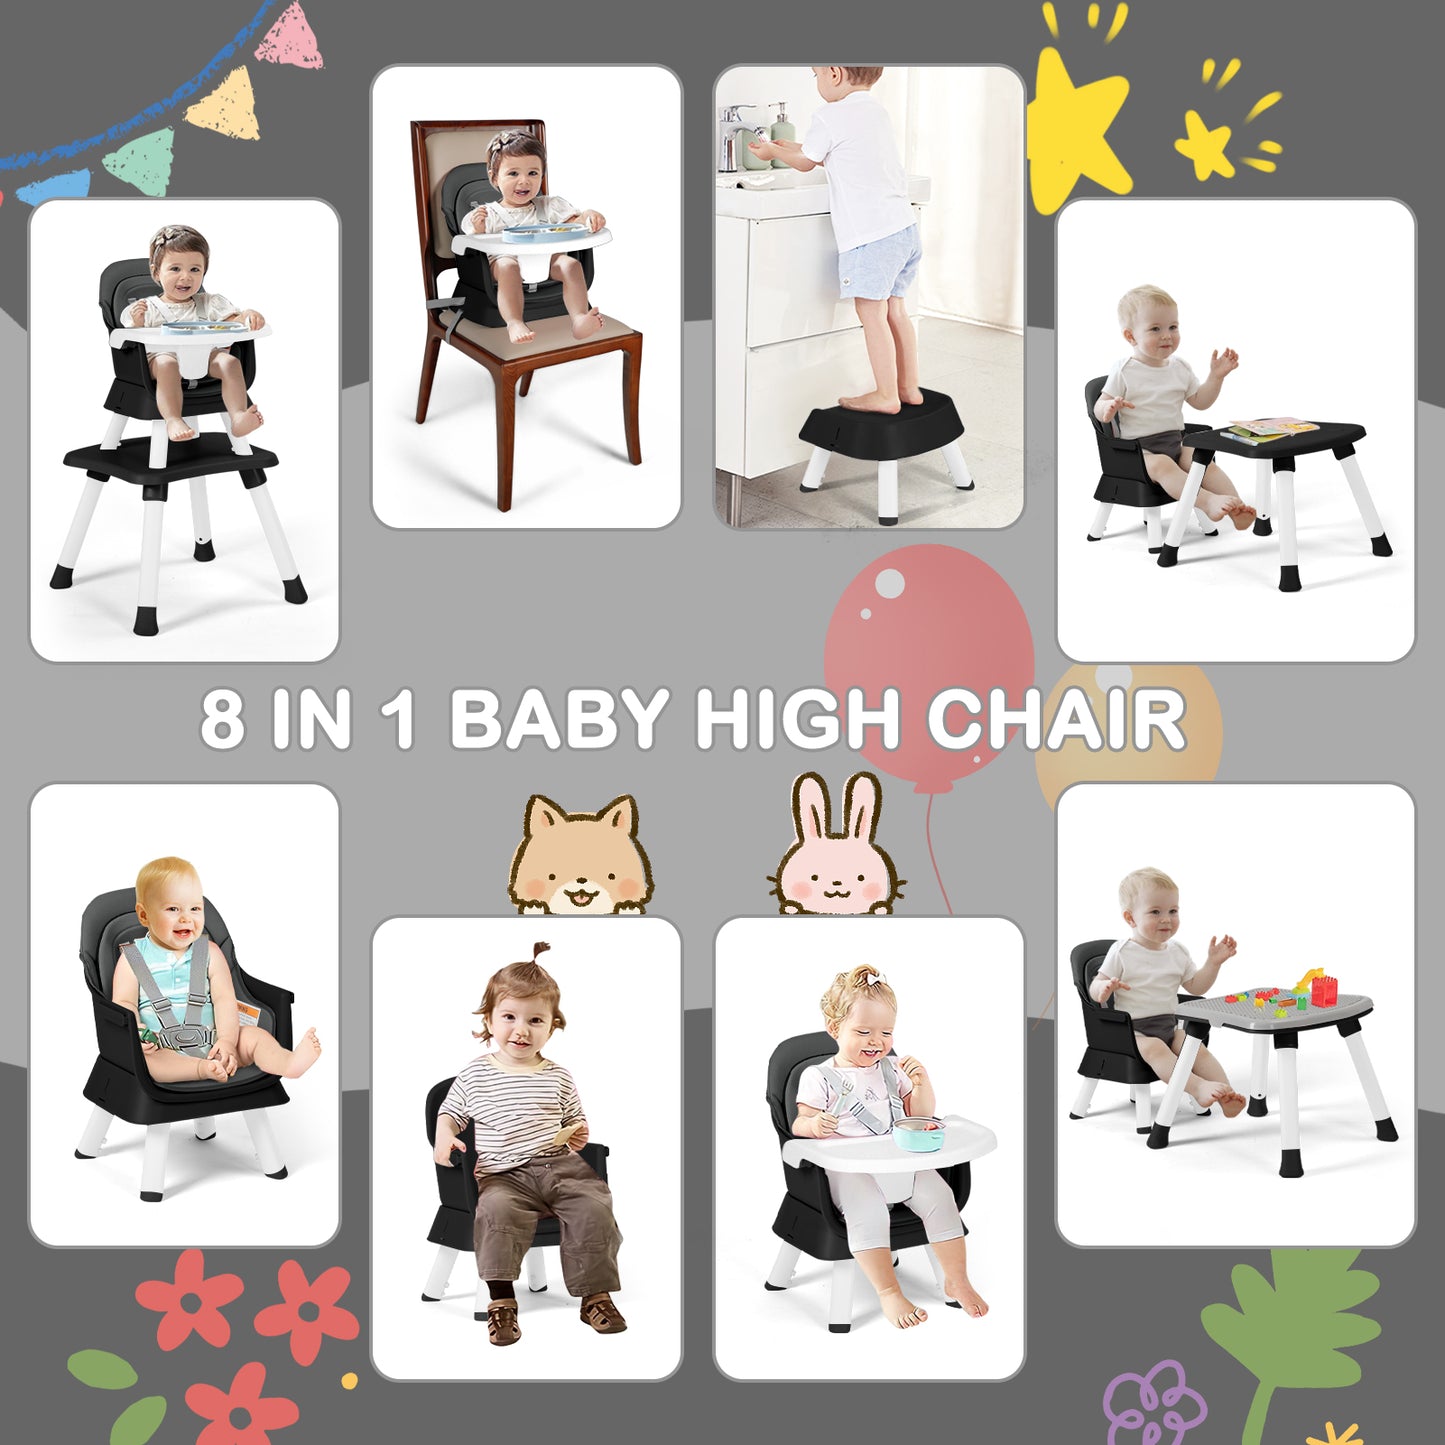 8 in 1 Baby High Chair, Toddler Dining Booster Seat/Kids Table & Chair Set/Building Block Table/Kids Stool, Grey